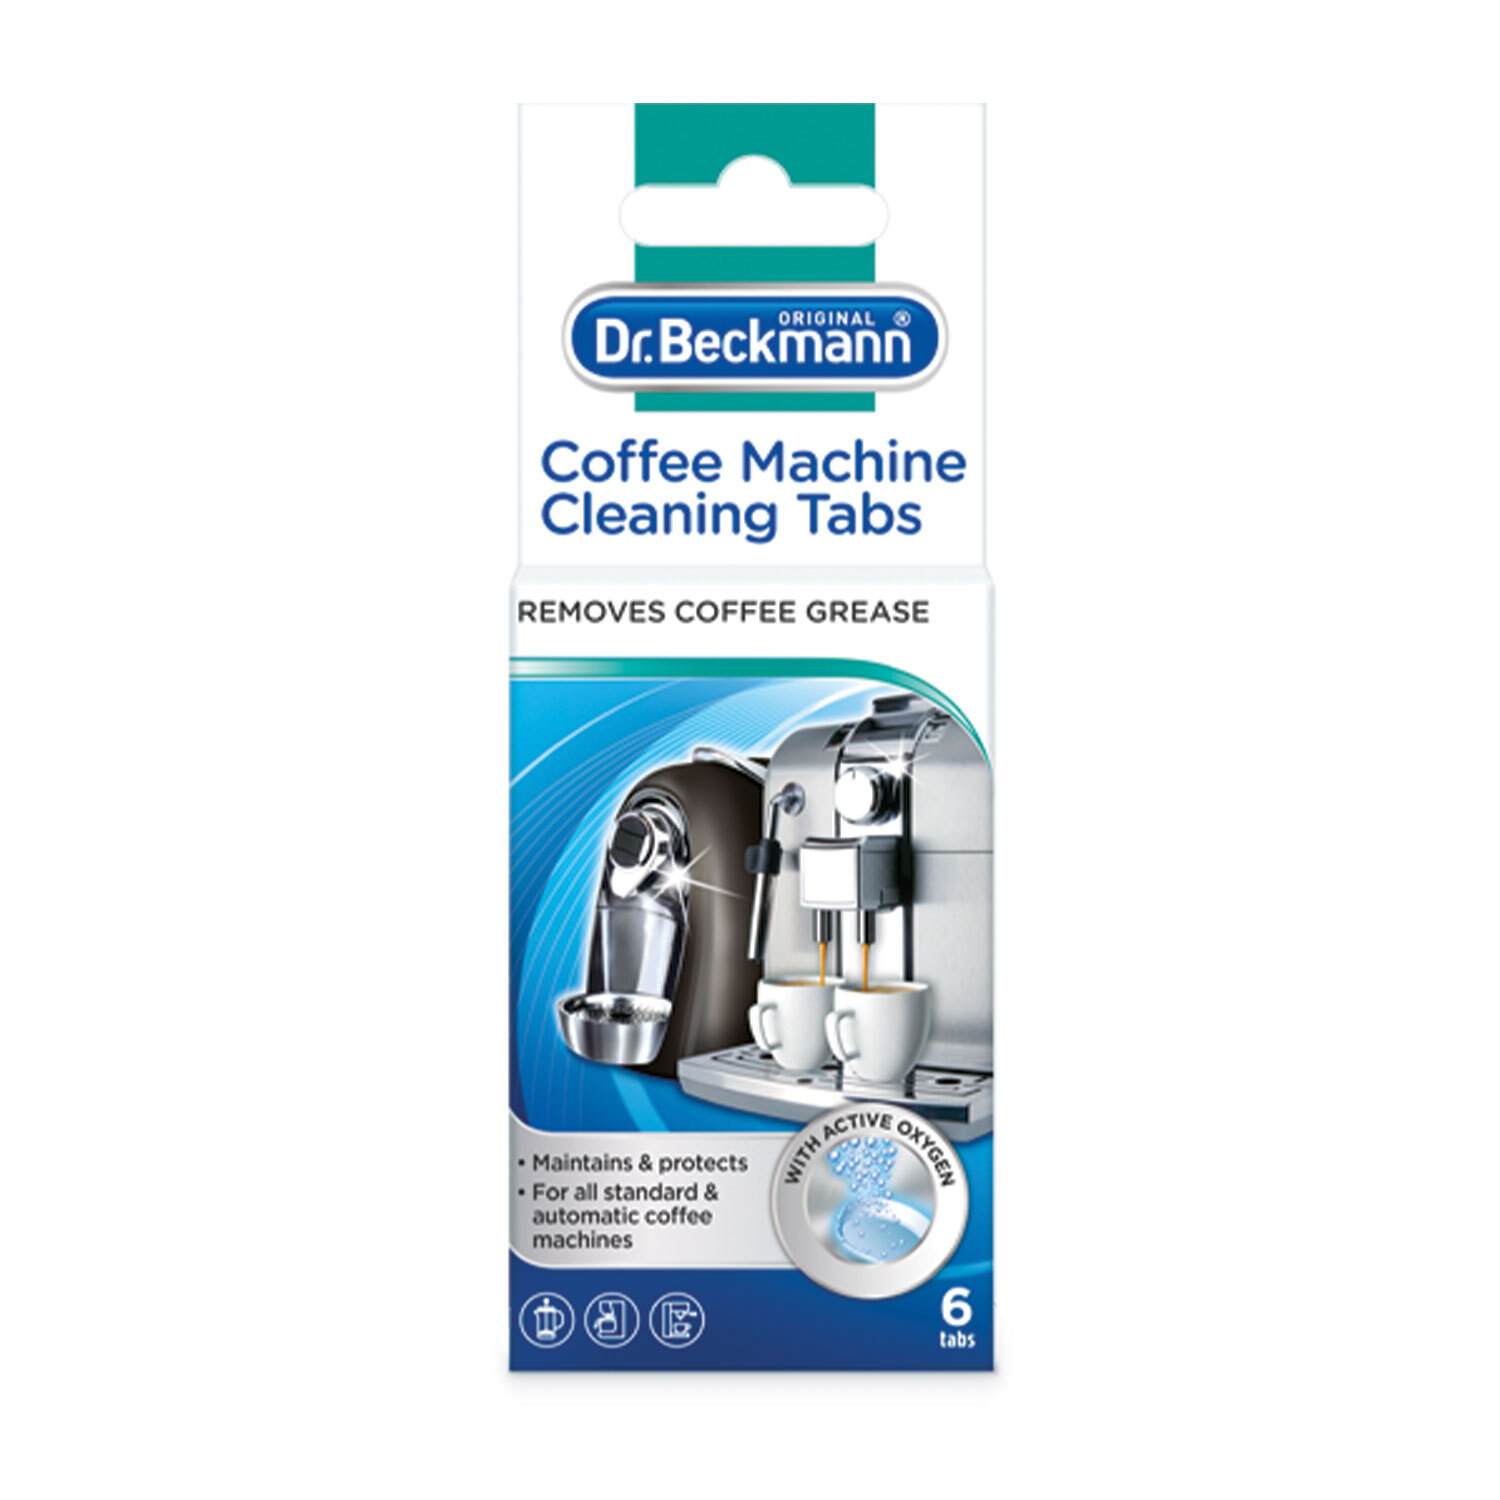 Dr Beckmann Coffee Machine Cleaning Tabs Image